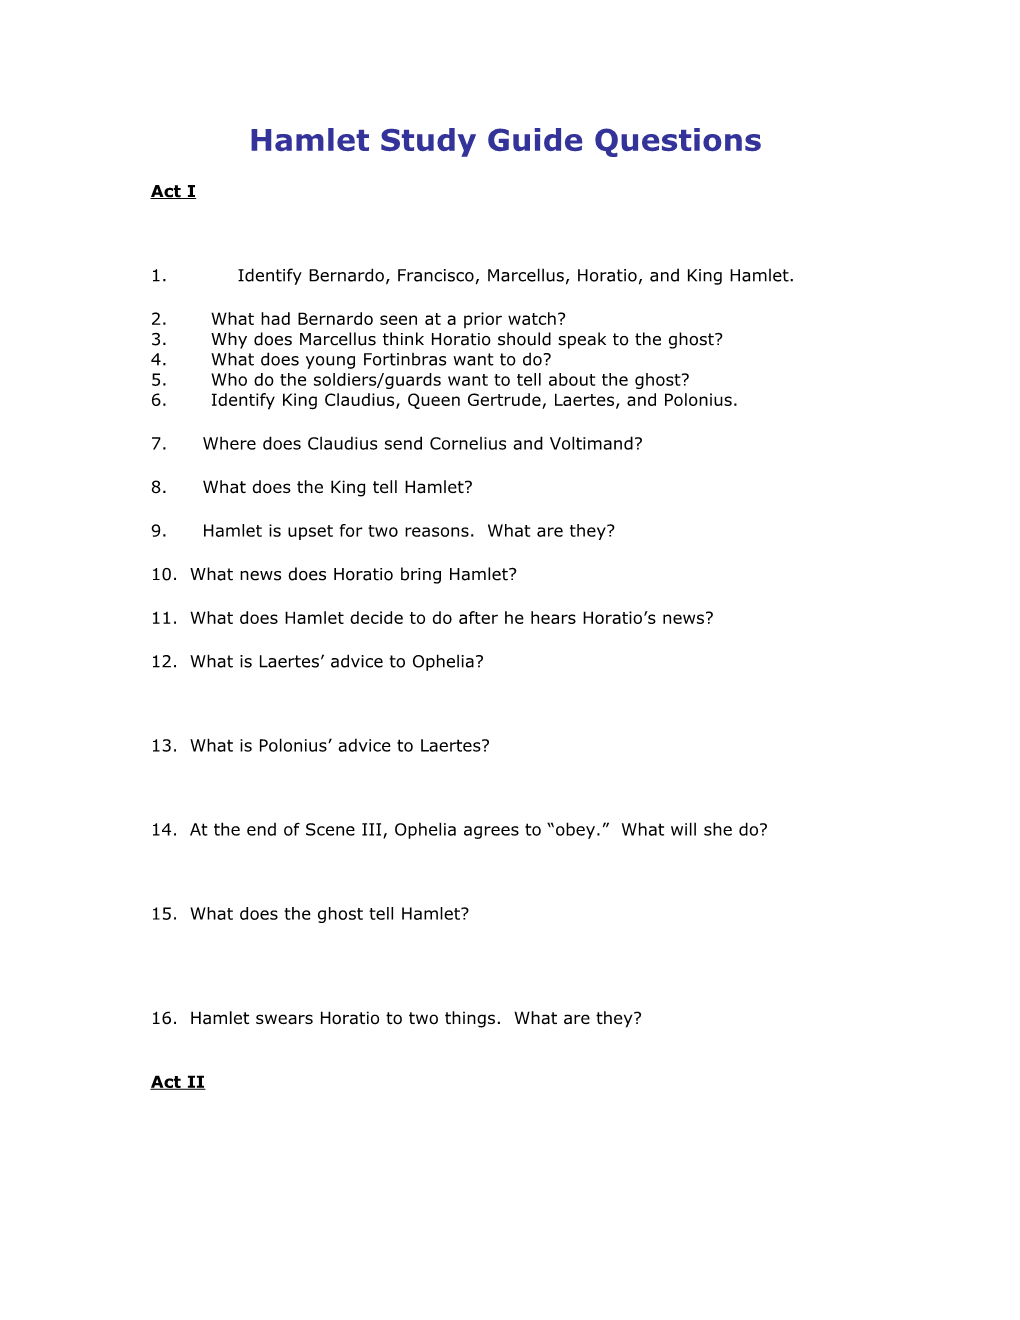 Hamlet Study Guide Questions s1